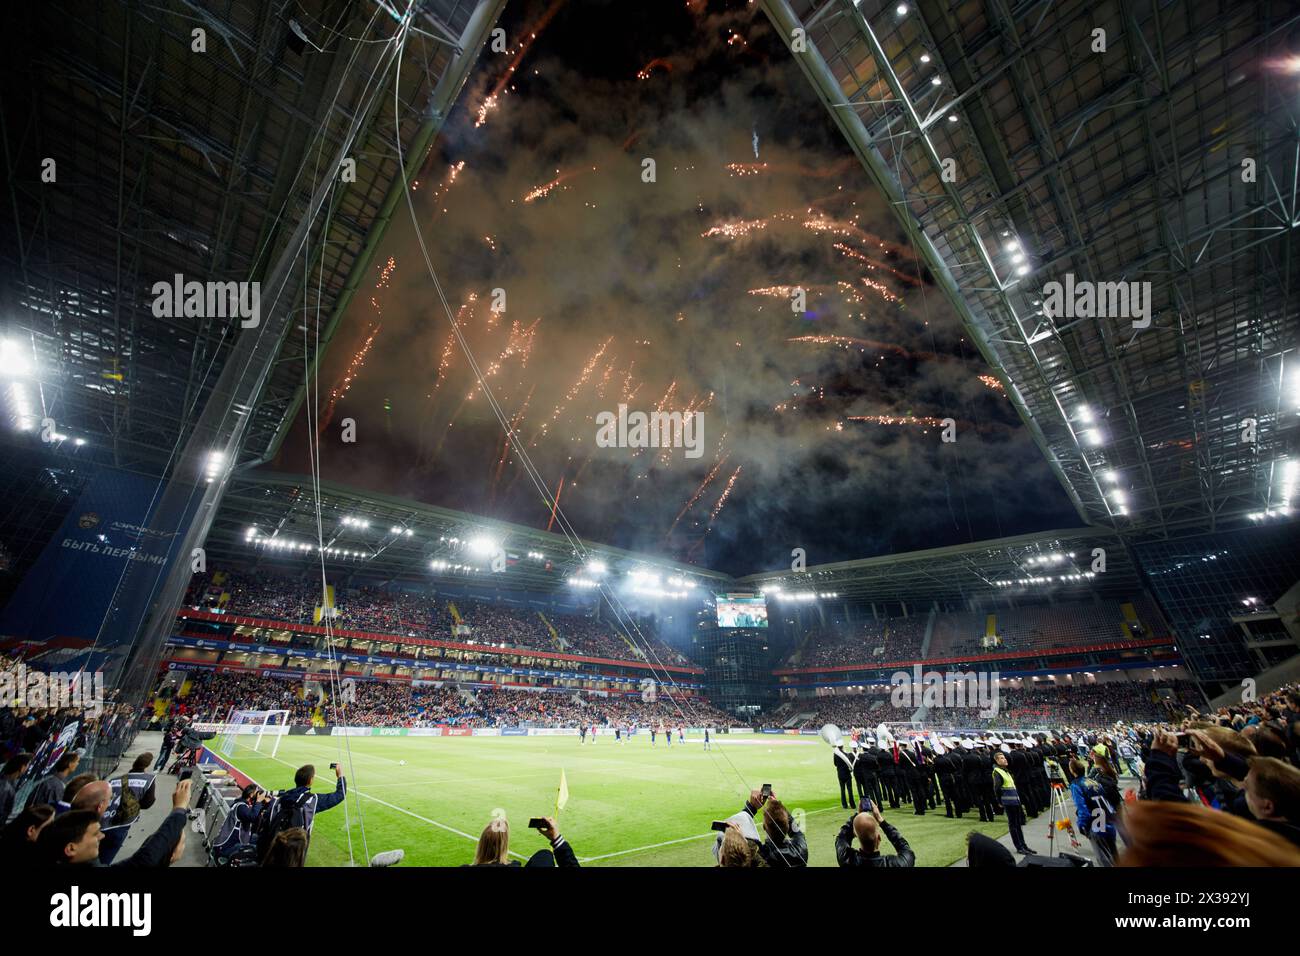 MOSCOW, RUSSIA - SEP 9, 2016: Fireworks at opening new CSKA Arena sports complex during match between CSKA and Terek soccer teams. Stock Photo